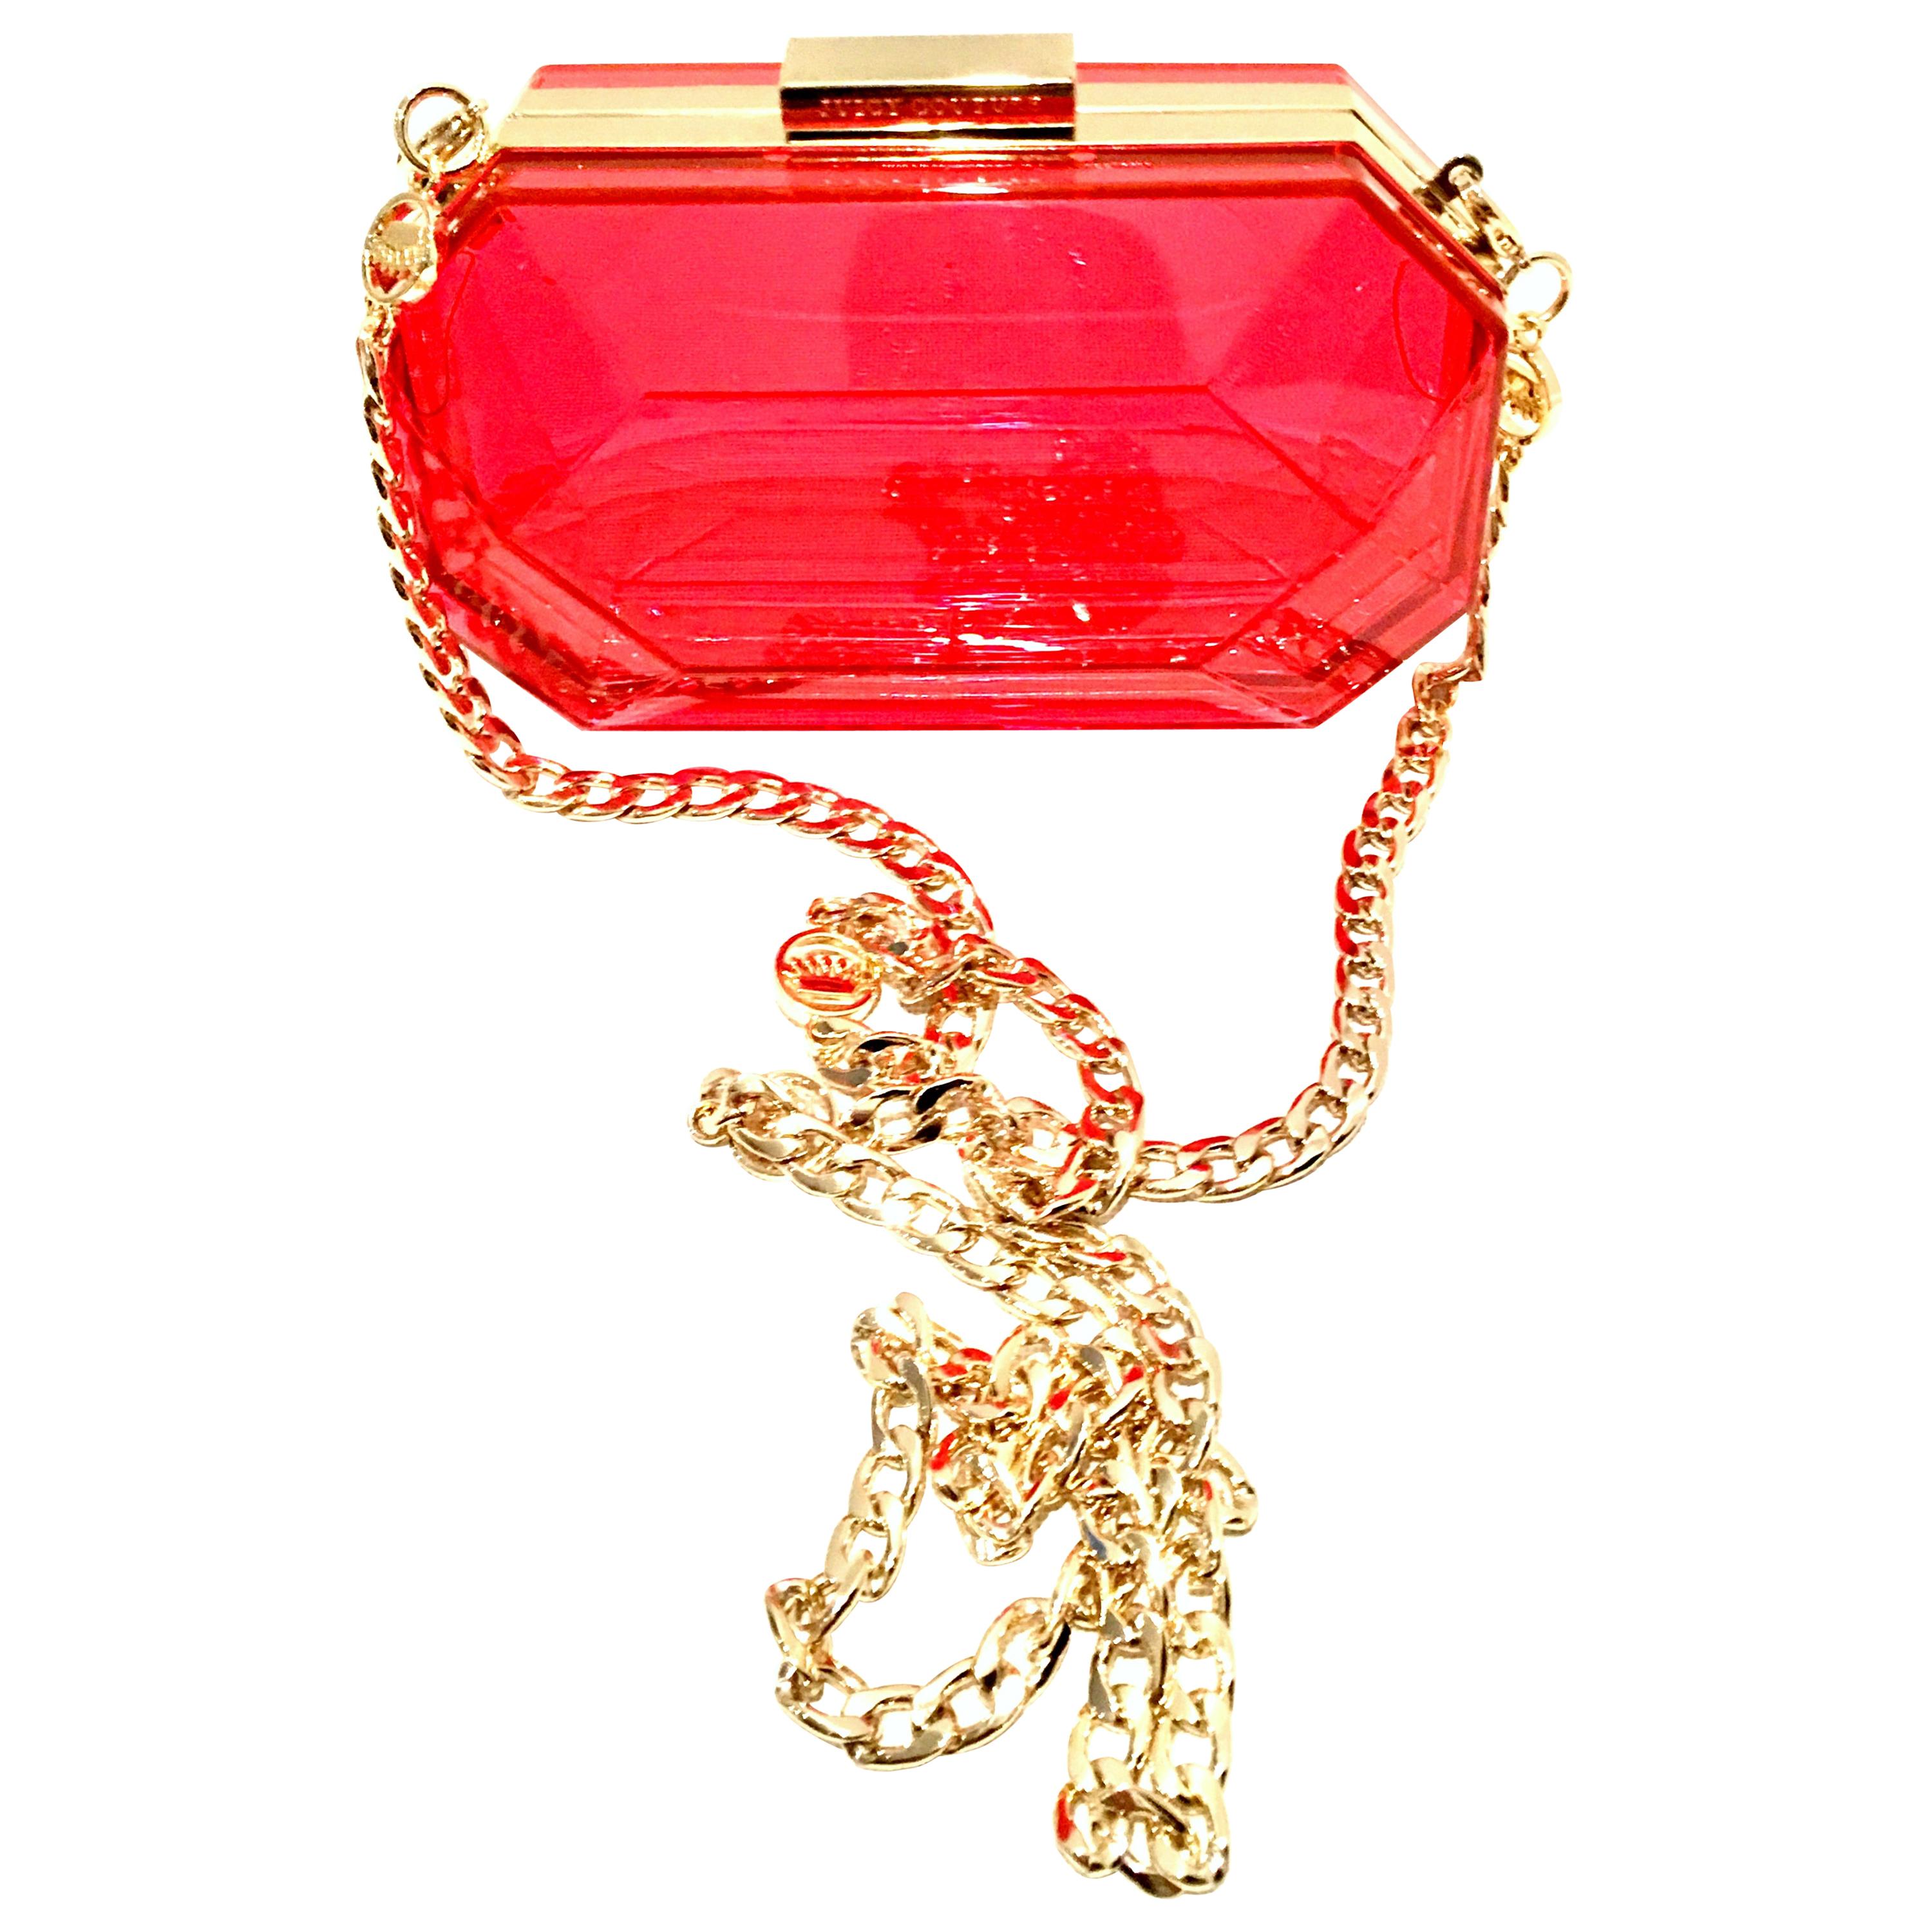 21st Century Lucite & Gold Minaudiere Clutch Hand Bag By, Juicy Couture For Sale